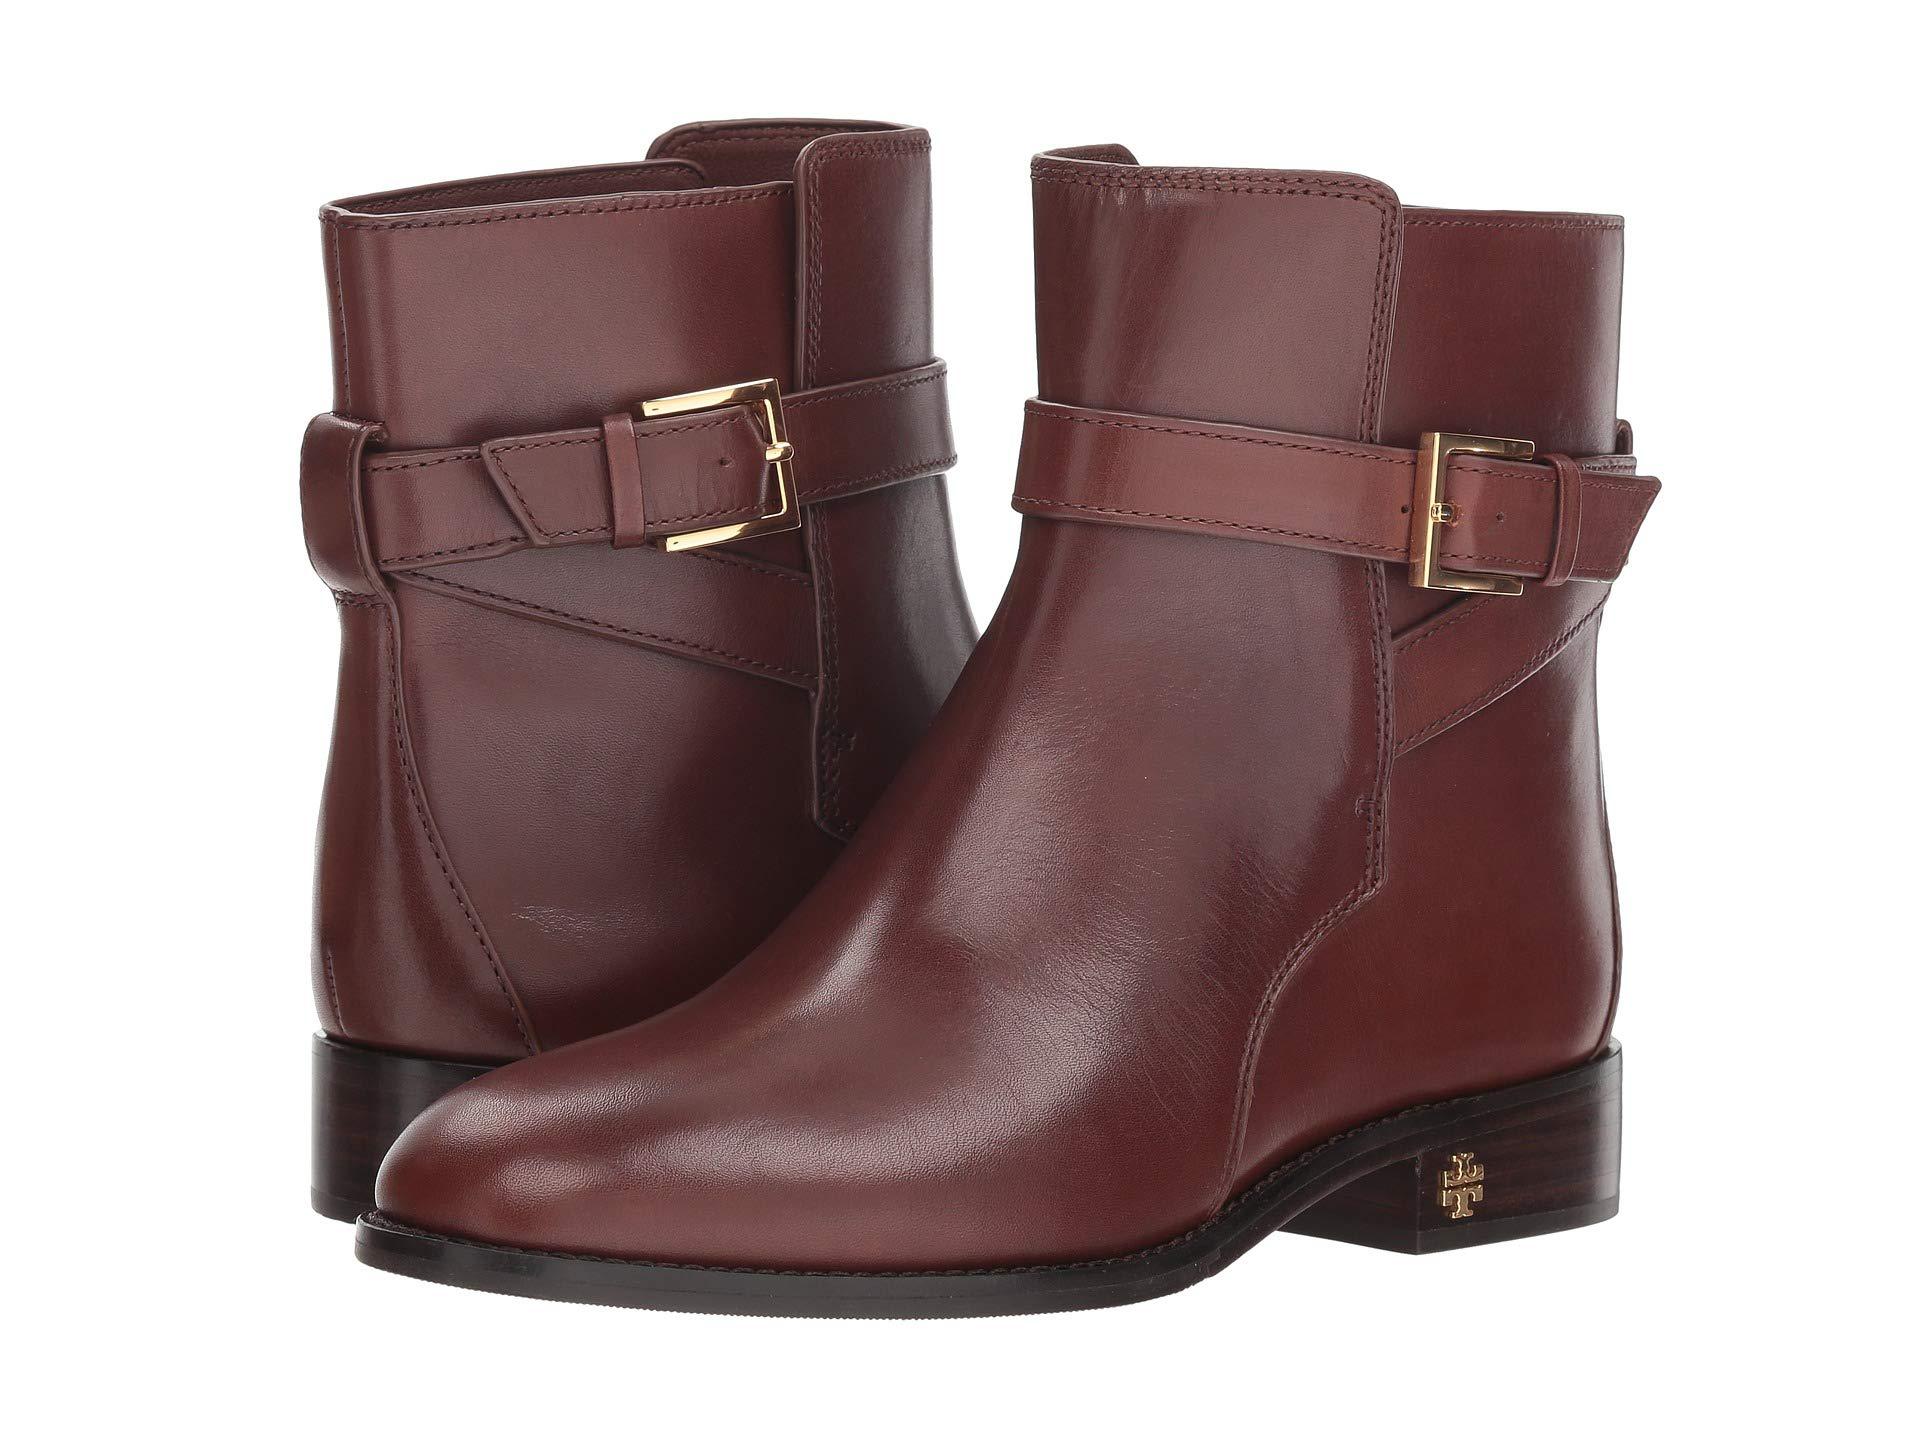 Lyst - Tory Burch Brooke Ankle Bootie (perfect Brown) Women's Boots in ...